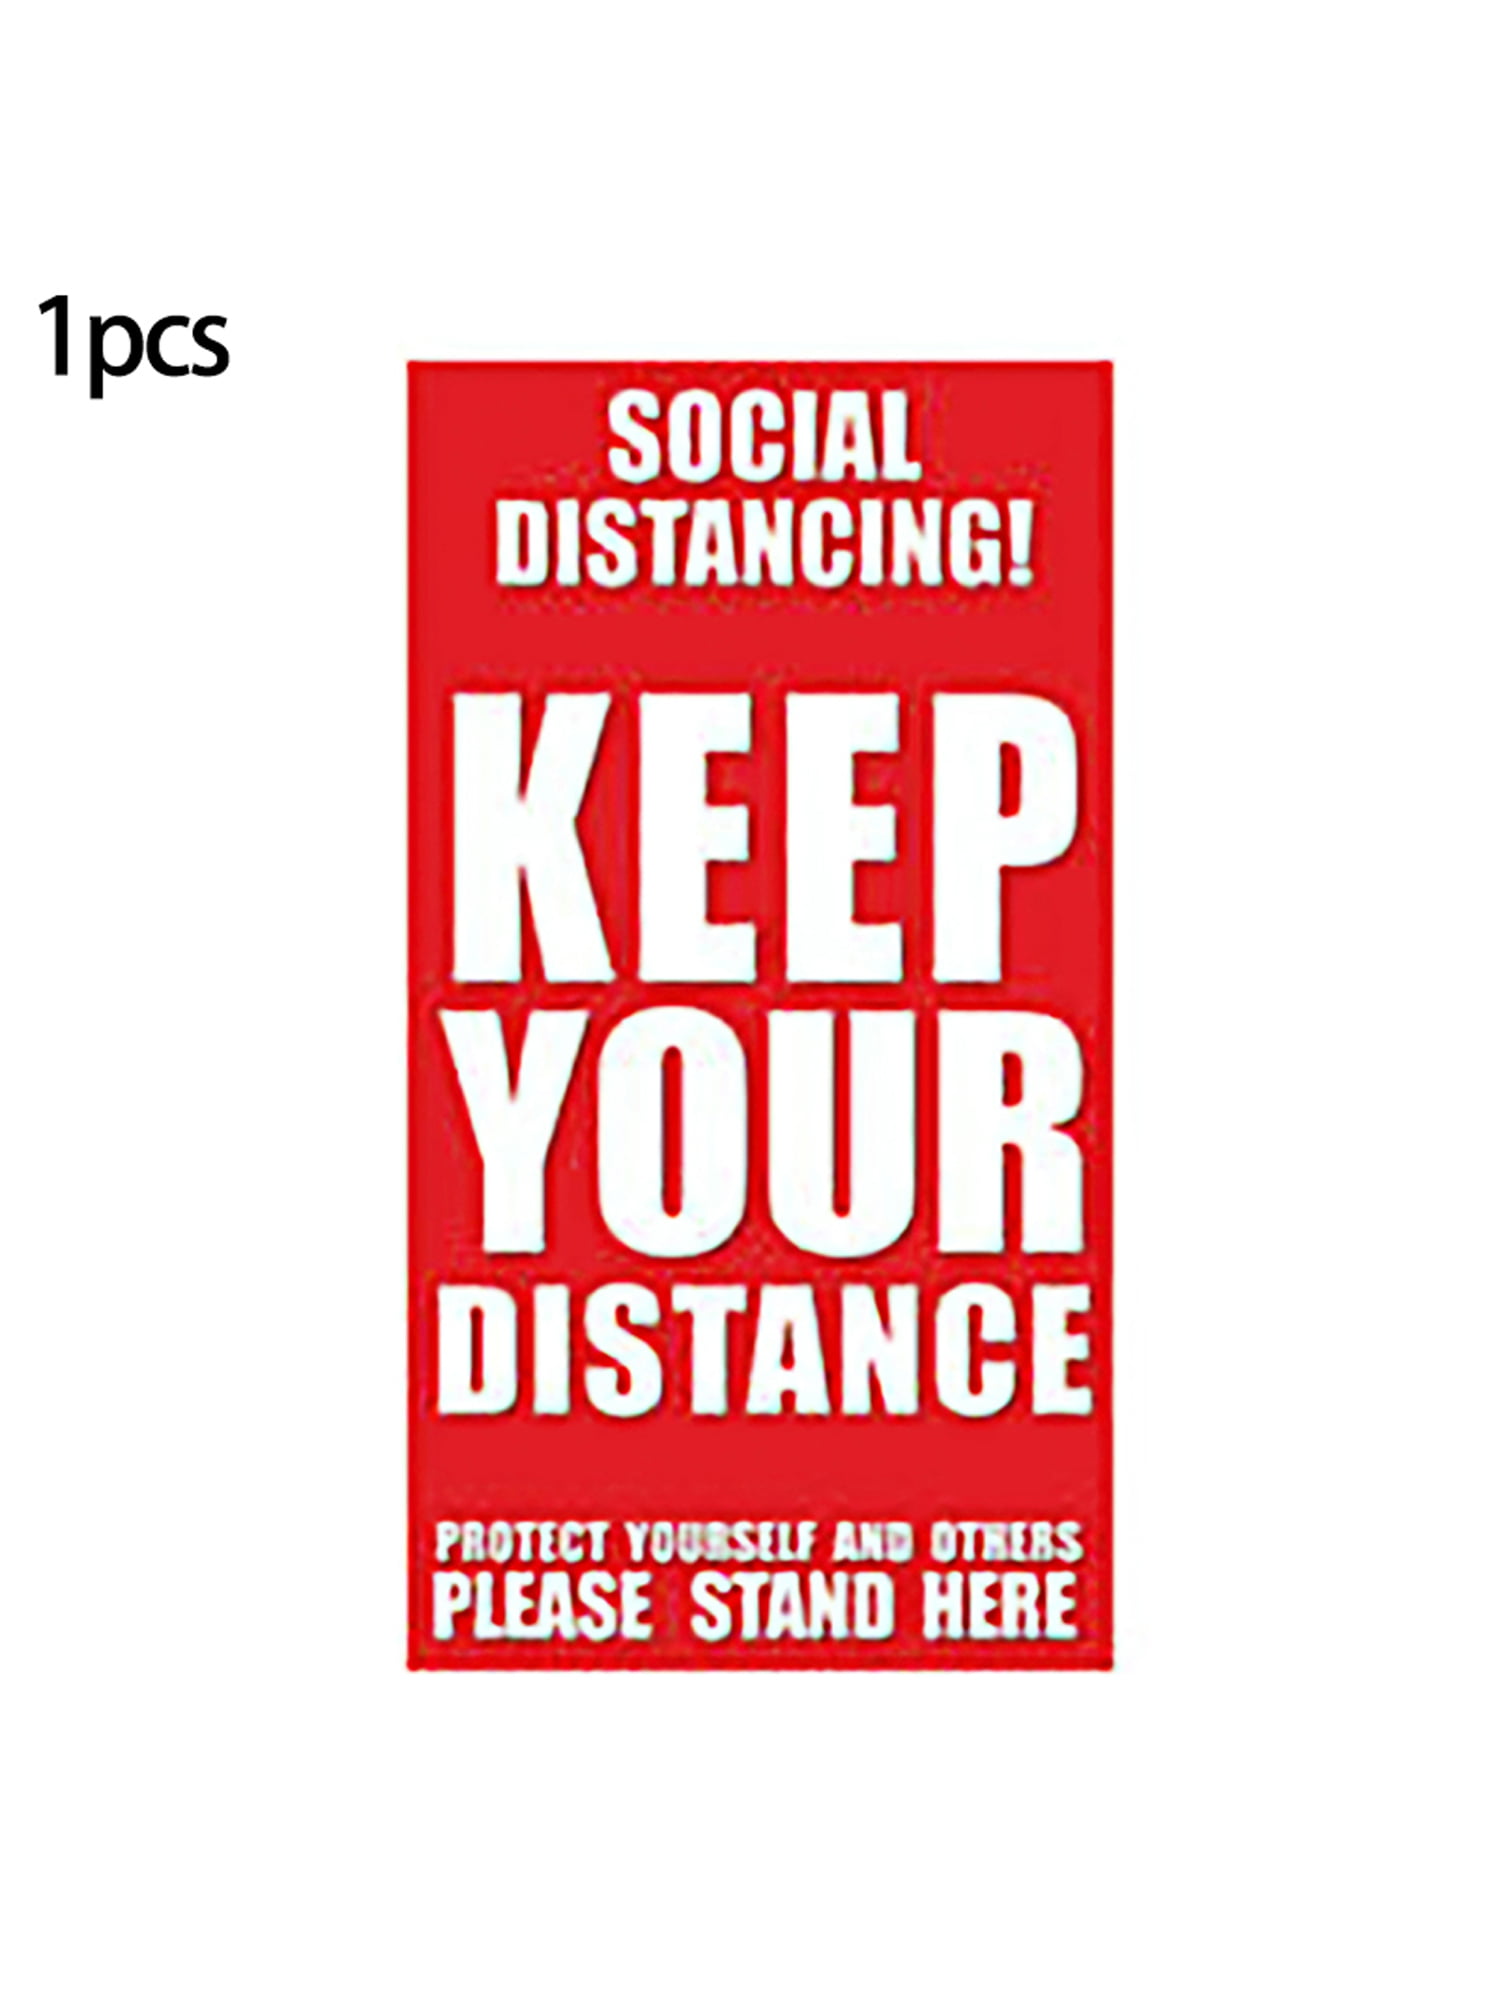 10PCs Social Distancing Signs 6 Feets Self Adhesive Keep Distance Stickers Floor 